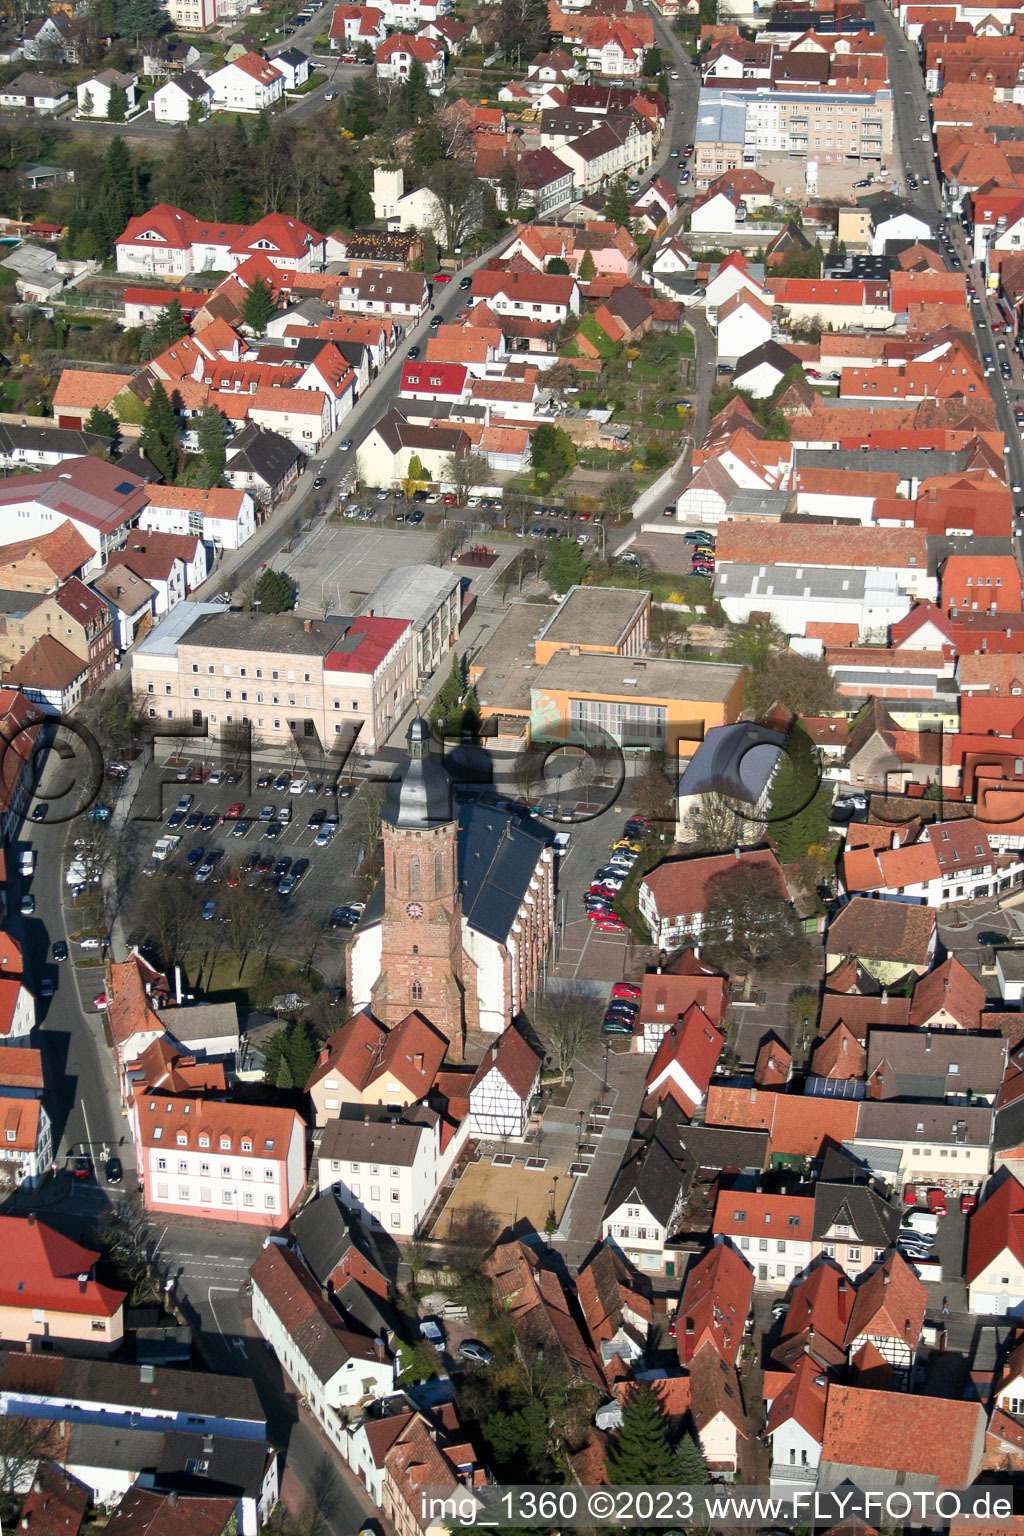 Aerial view of St. George's Church in Kandel in the state Rhineland-Palatinate, Germany